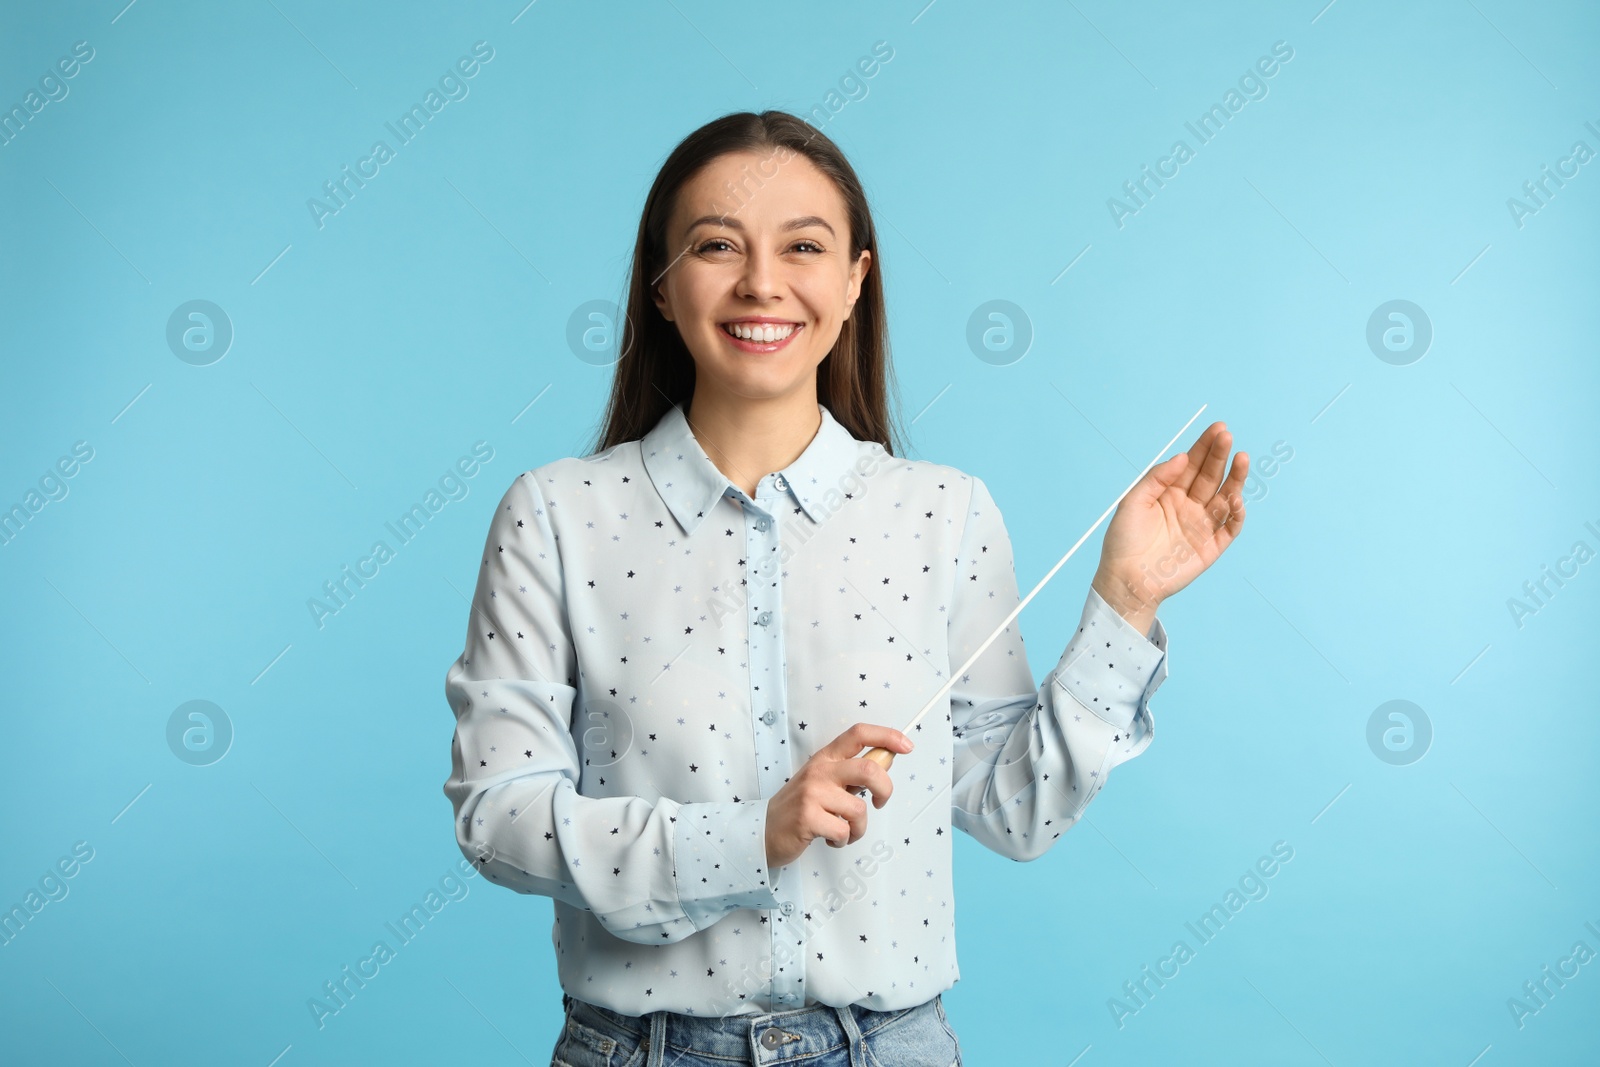 Photo of Music teacher with baton on turquoise background